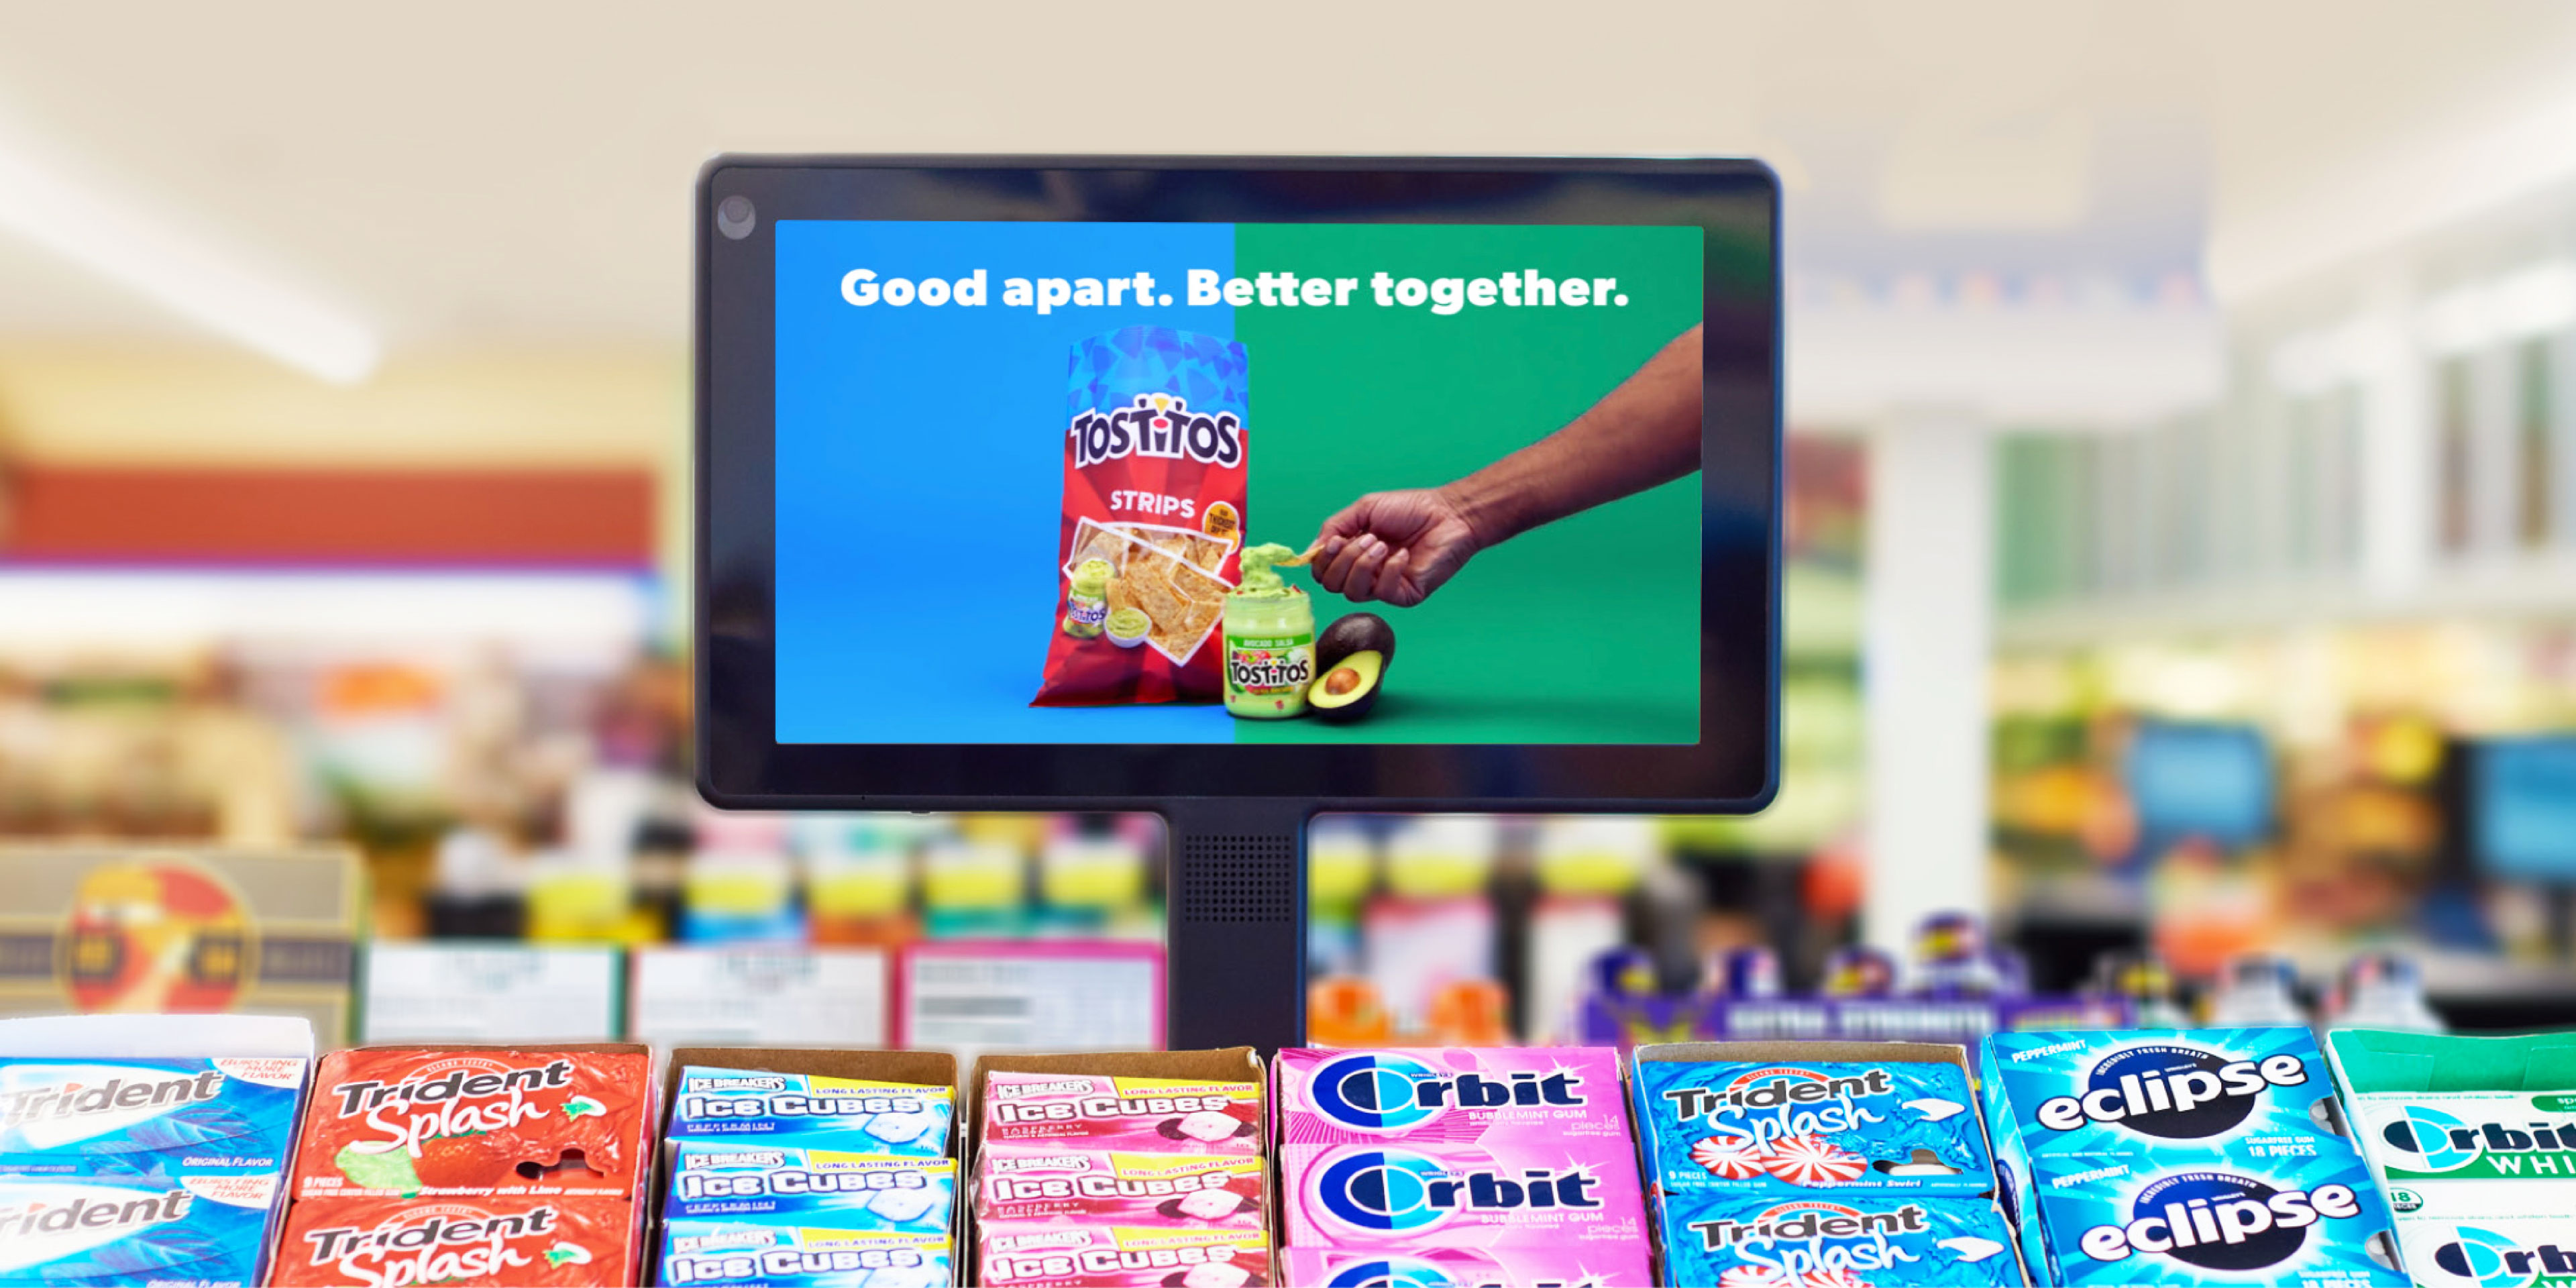 DOOH CPG advertising at the point-of-purchase